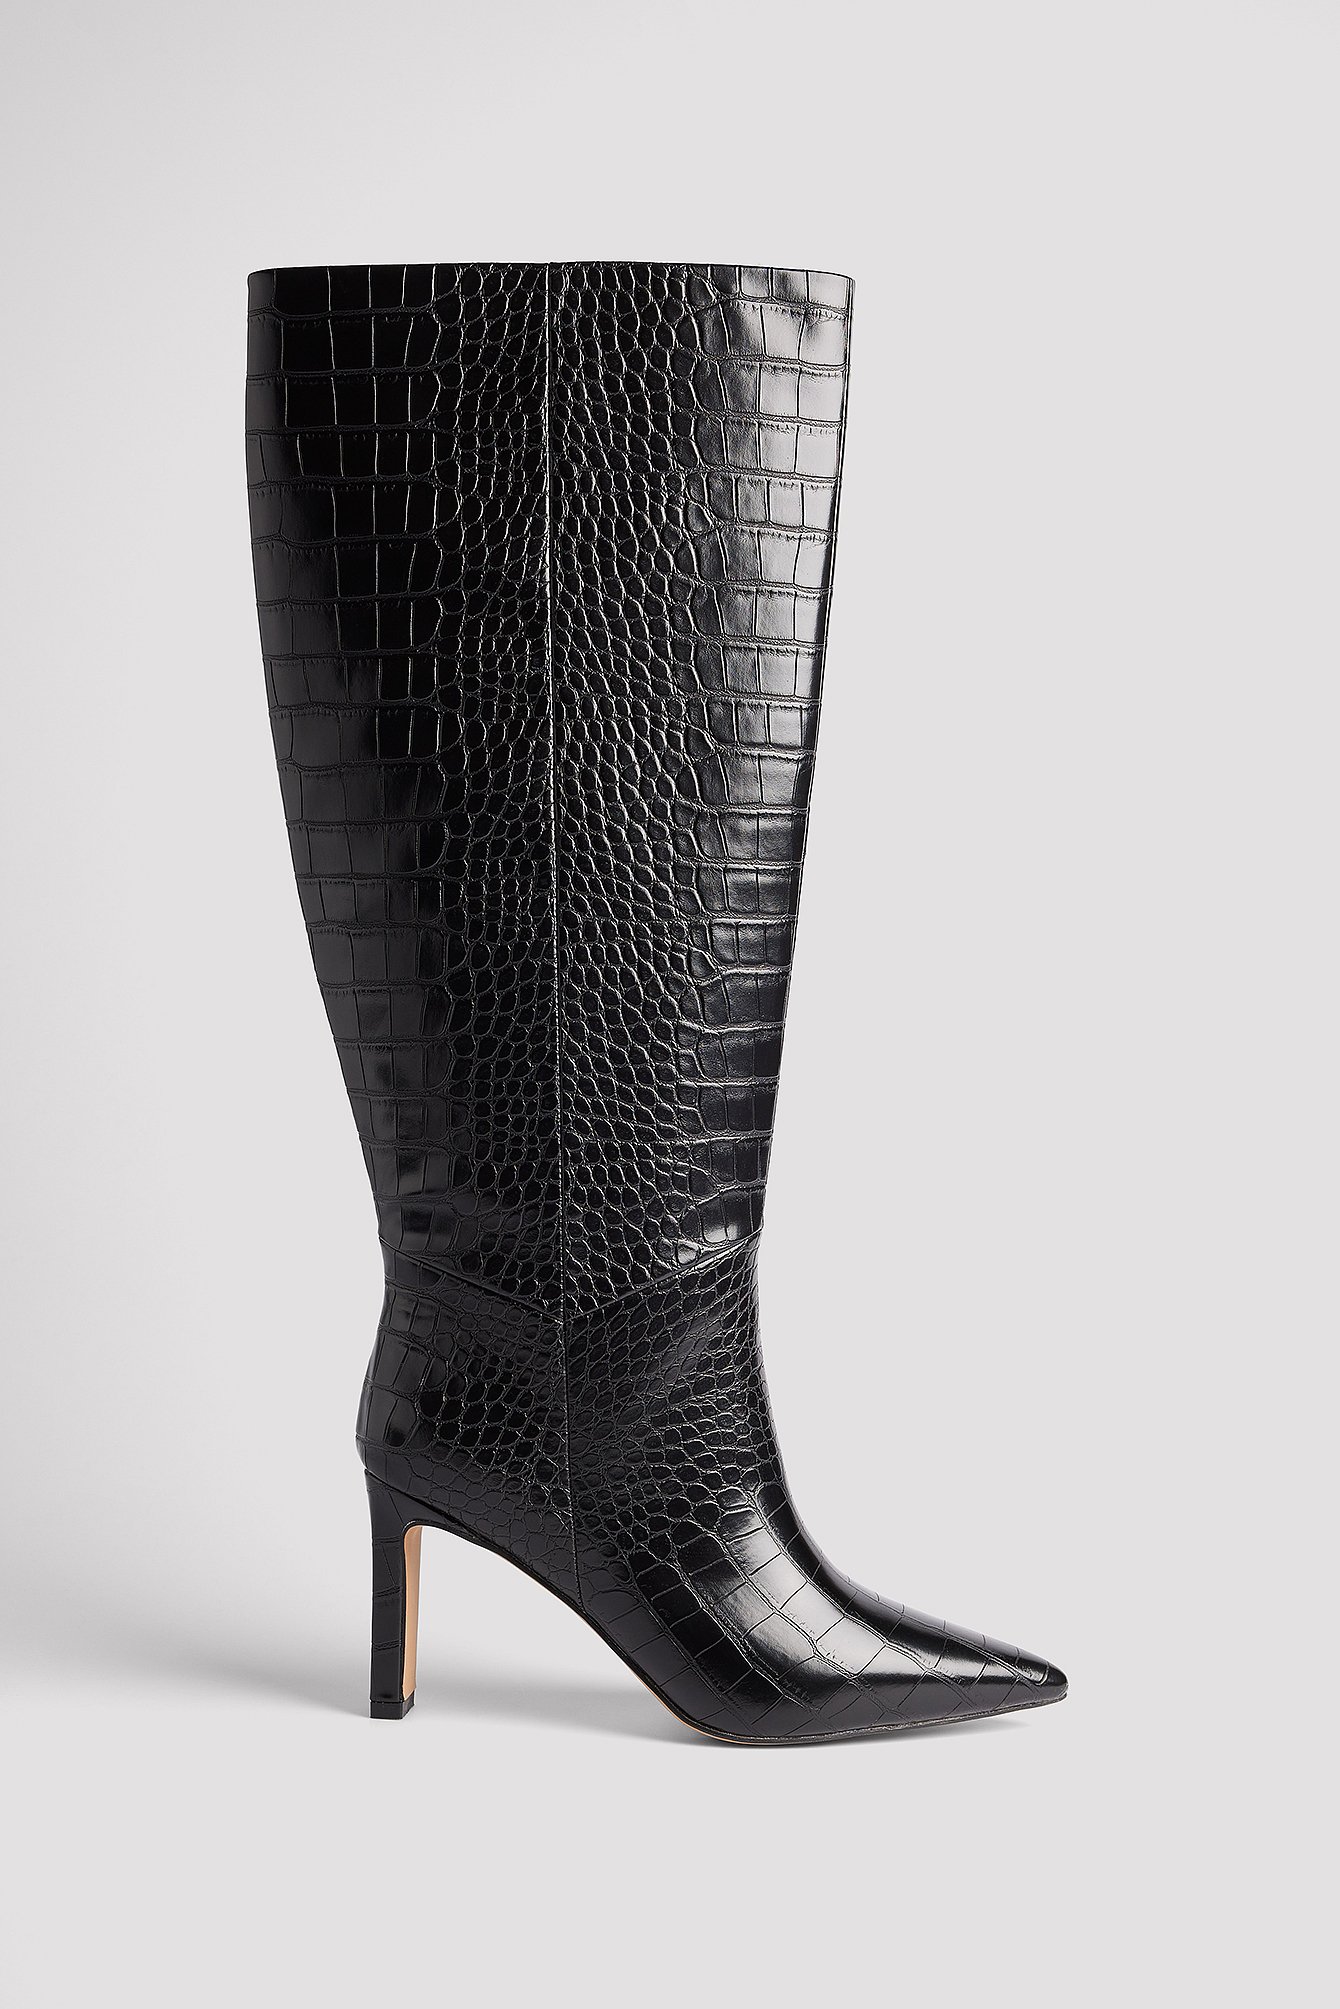 Croc Pointy Toe Boots